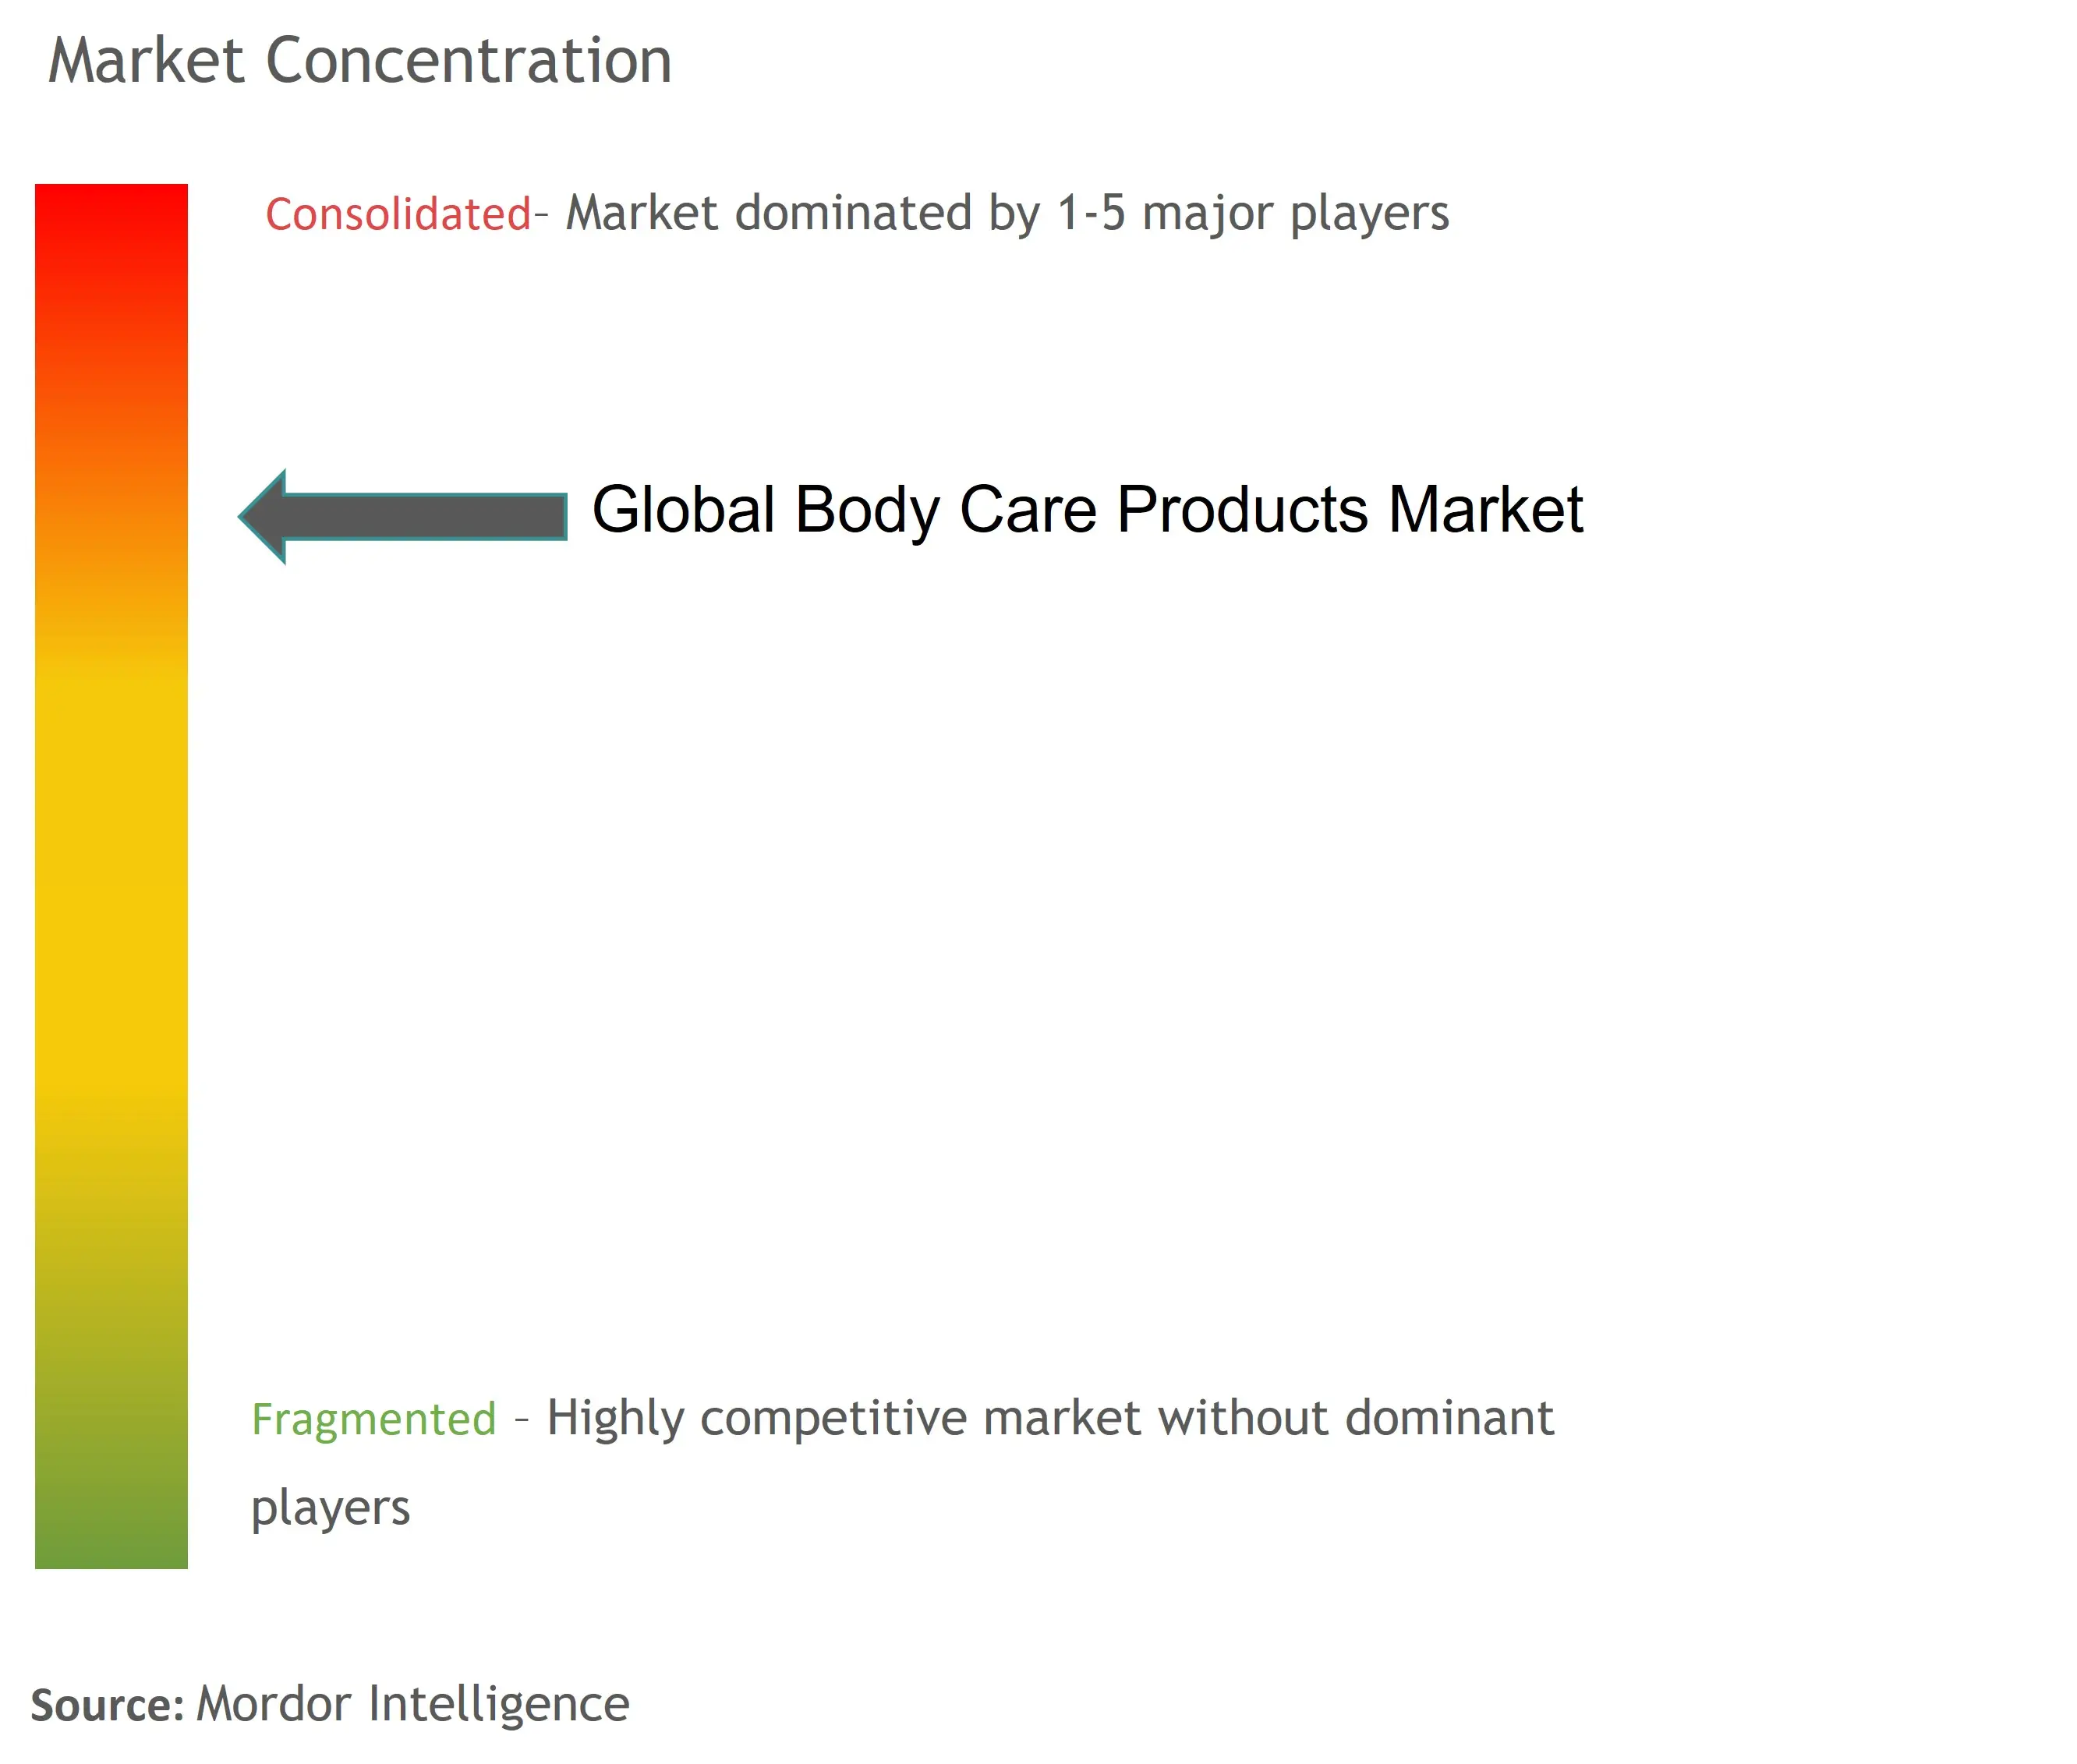 Body Care Products Market Concentration